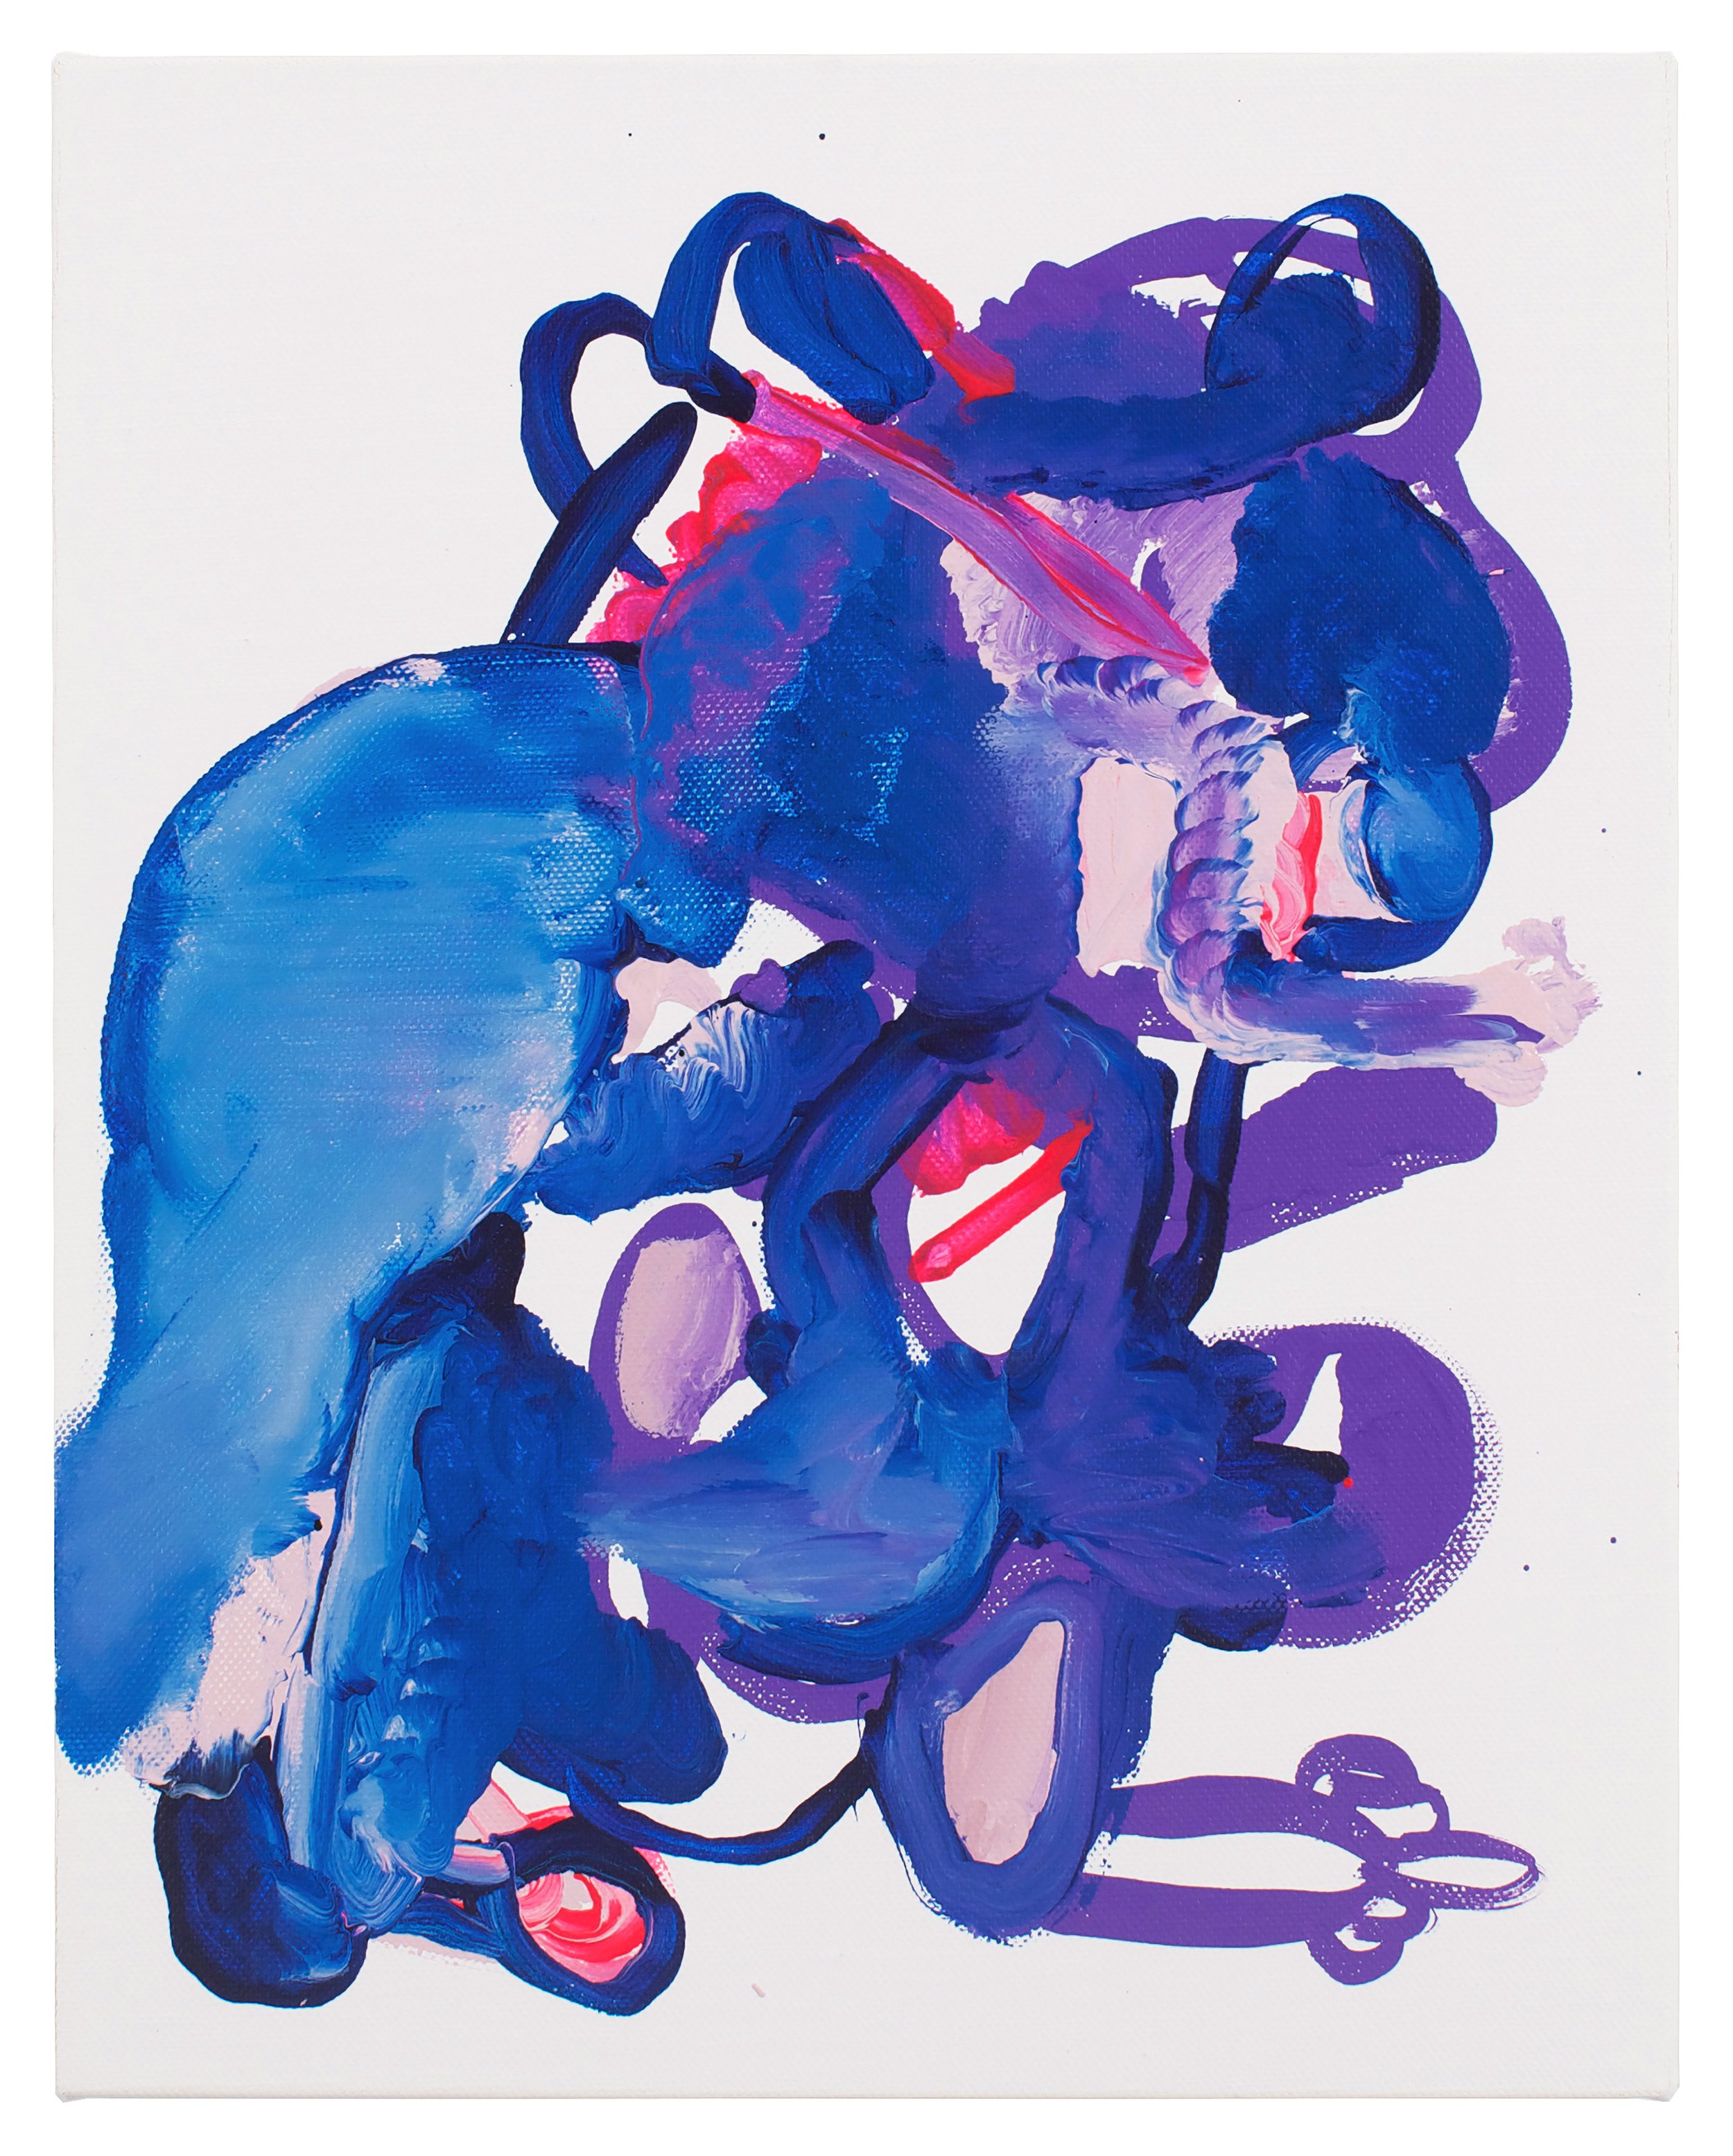  Drew Beattie and Ben Shepard  Blue Figure   2014 acrylic on canvas 14 x 11 inches 